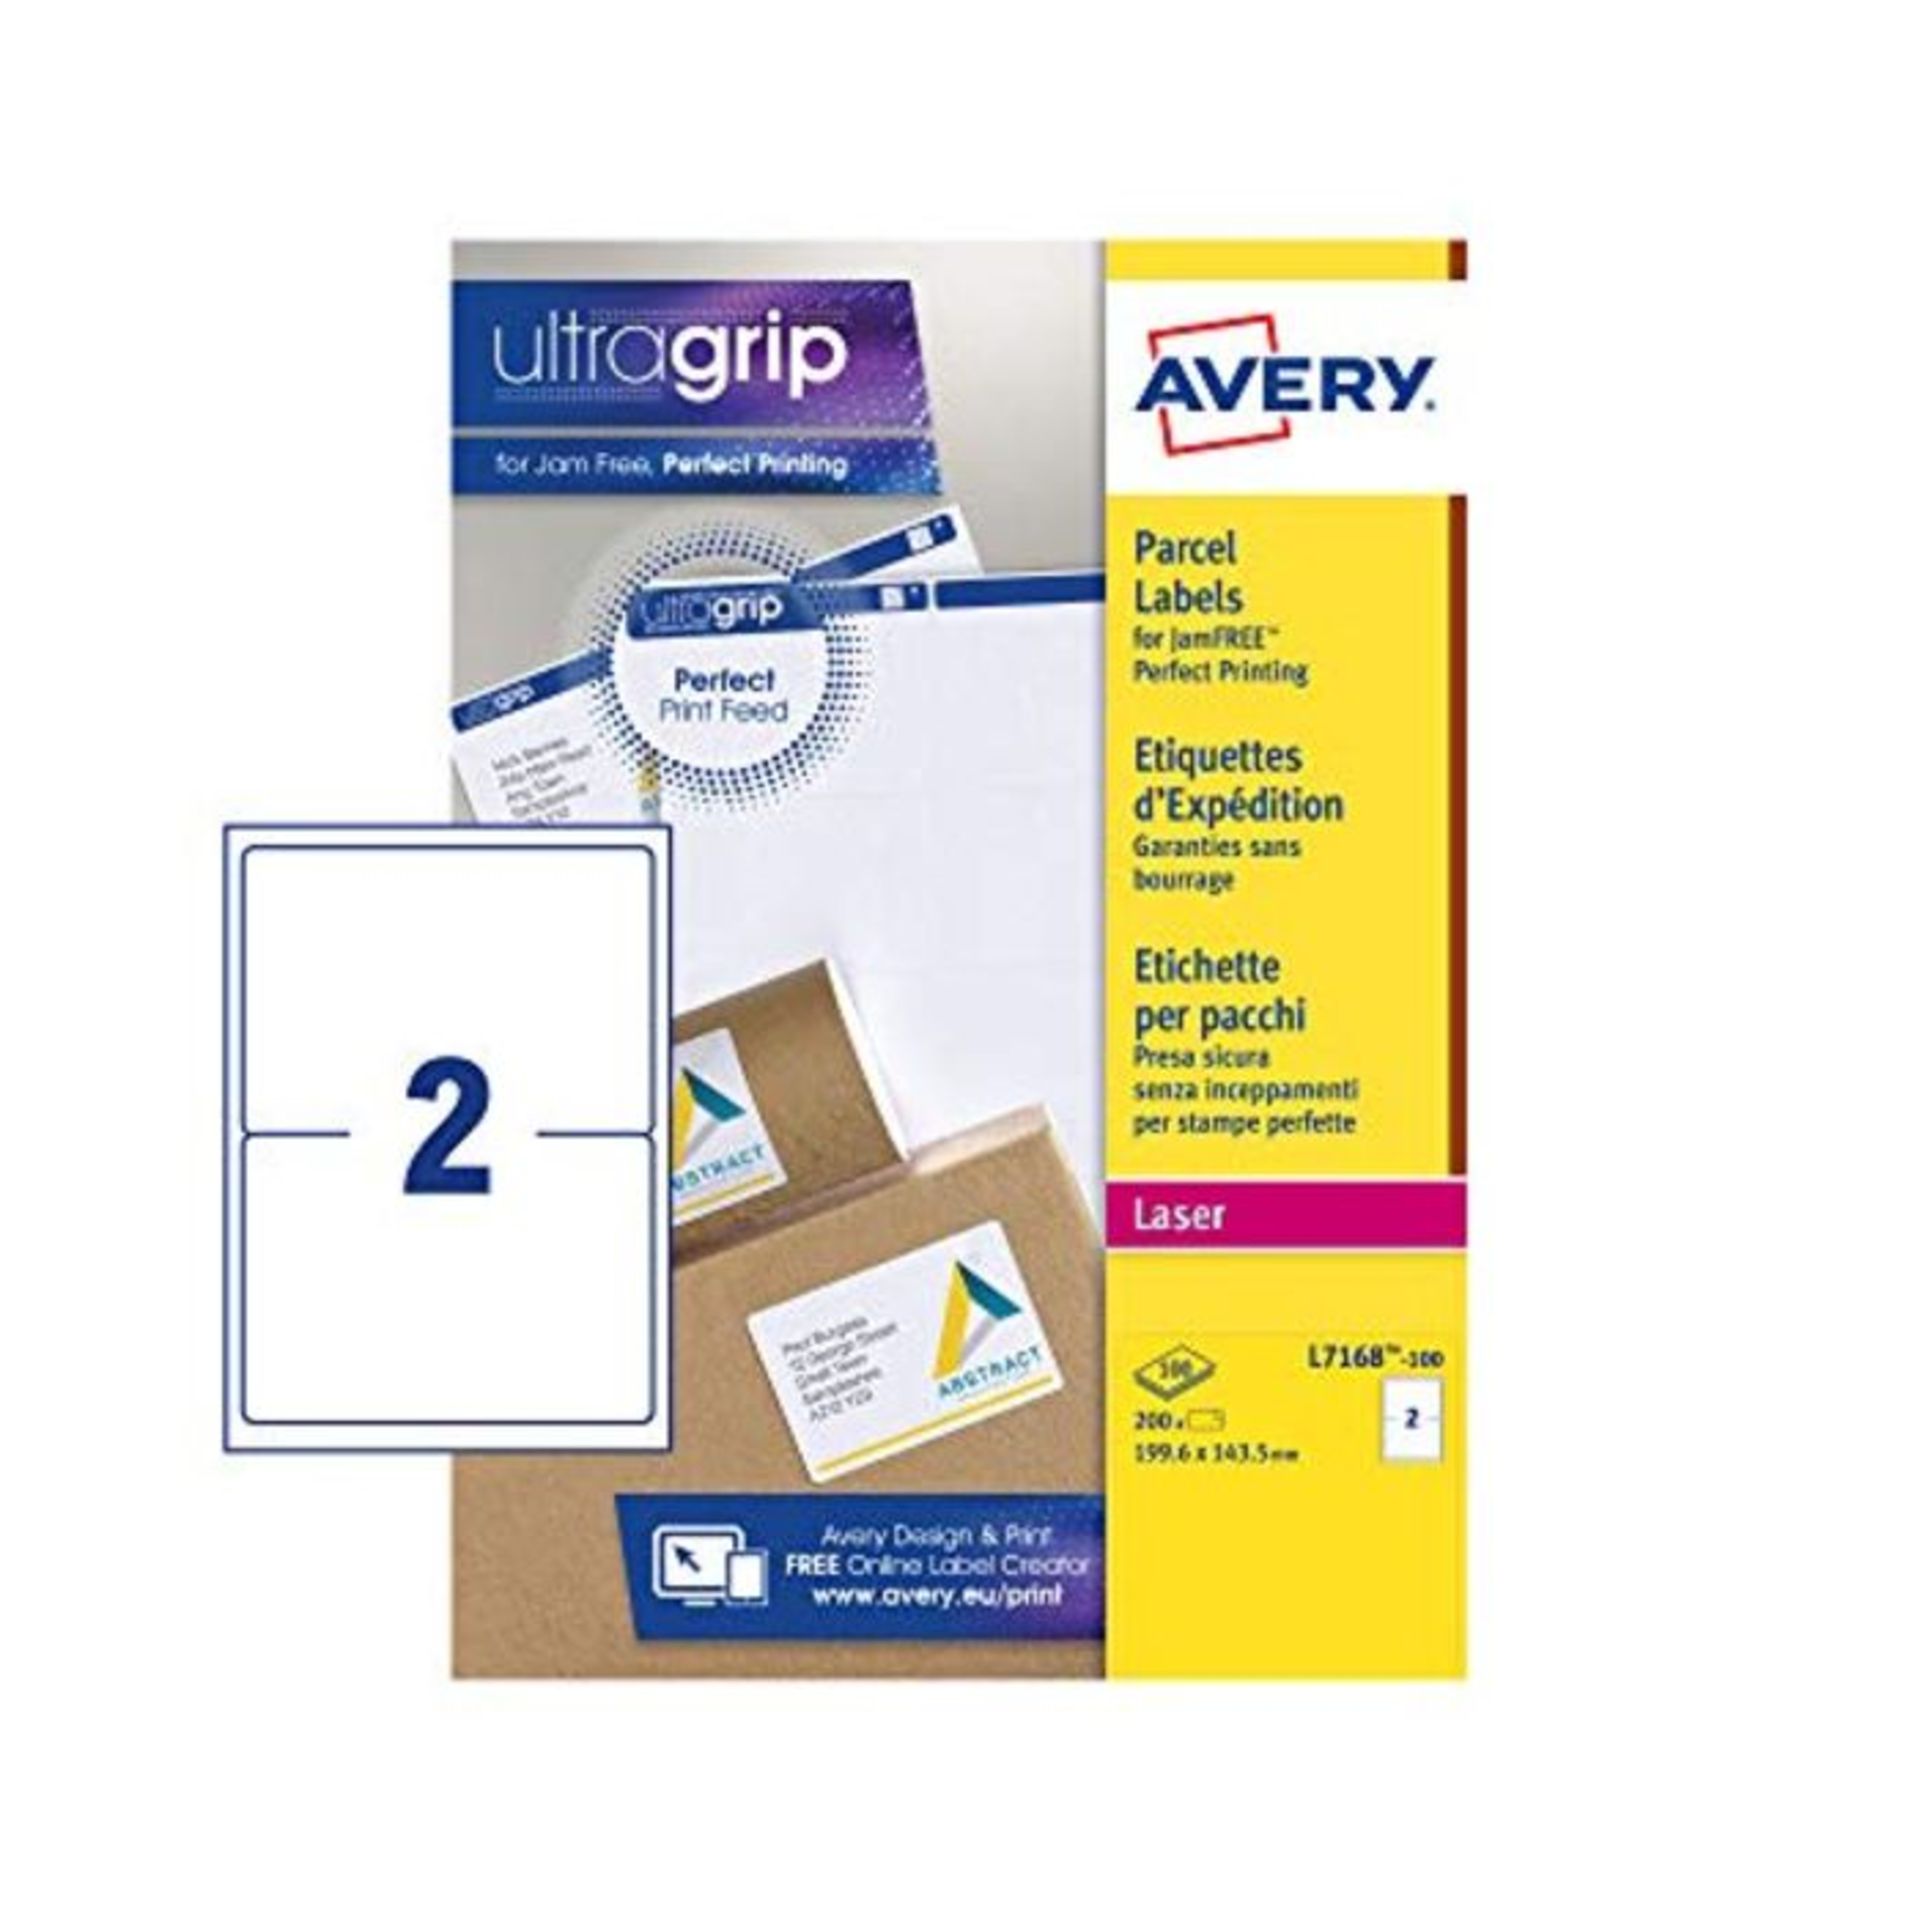 Avery L7168 Self Adhesive Parcel Shipping Labels, Laser Printers, 2 Labels Per A4 Shee